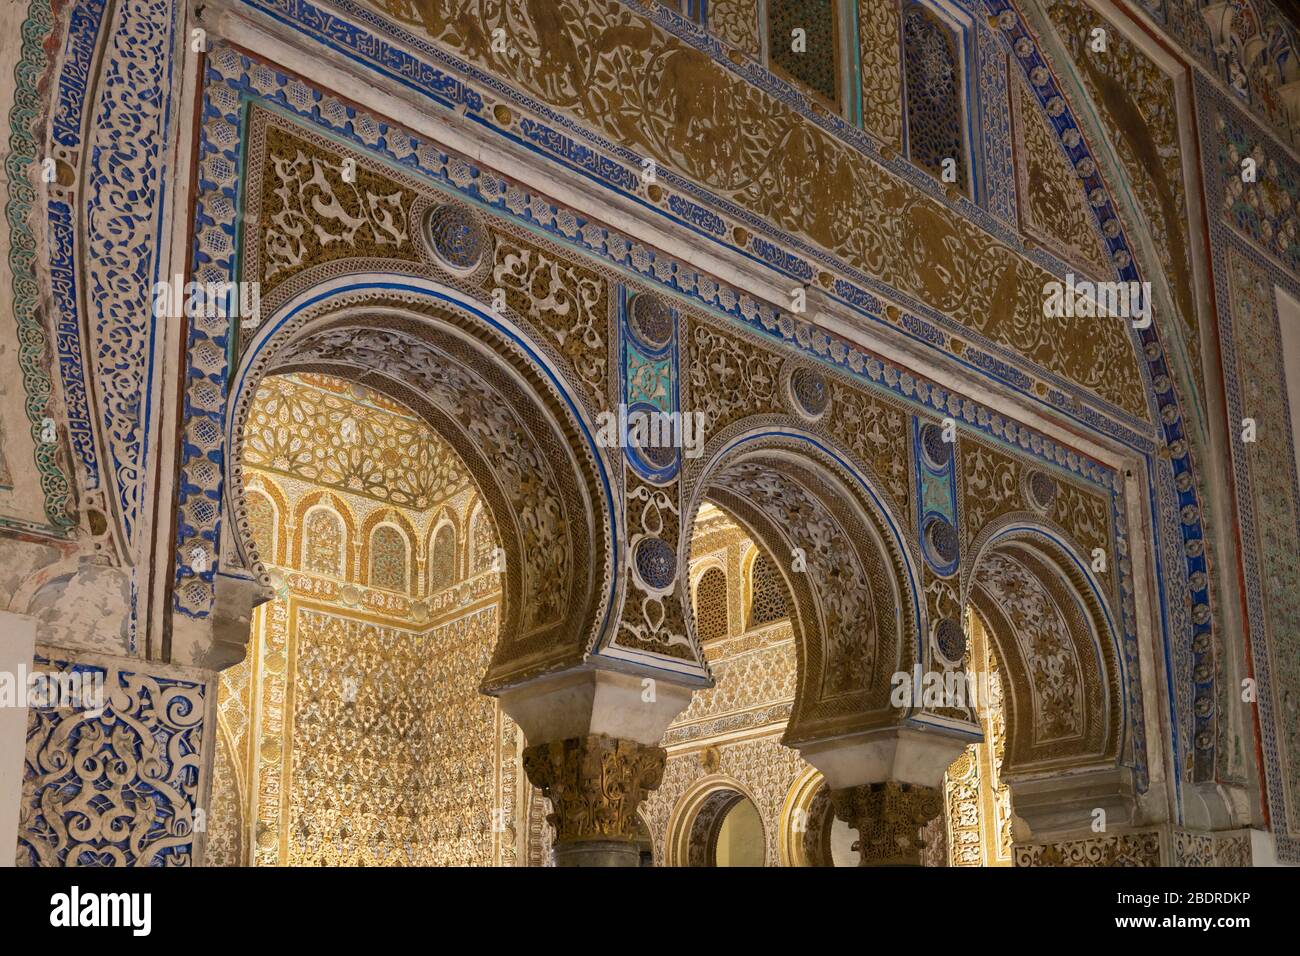 Royal Alcazars, Seville, Seville Province, Andalusia, Spain.   Decorated arches leading to the Salon de Ambajadores, the Salon of the Ambassadores.  T Stock Photo